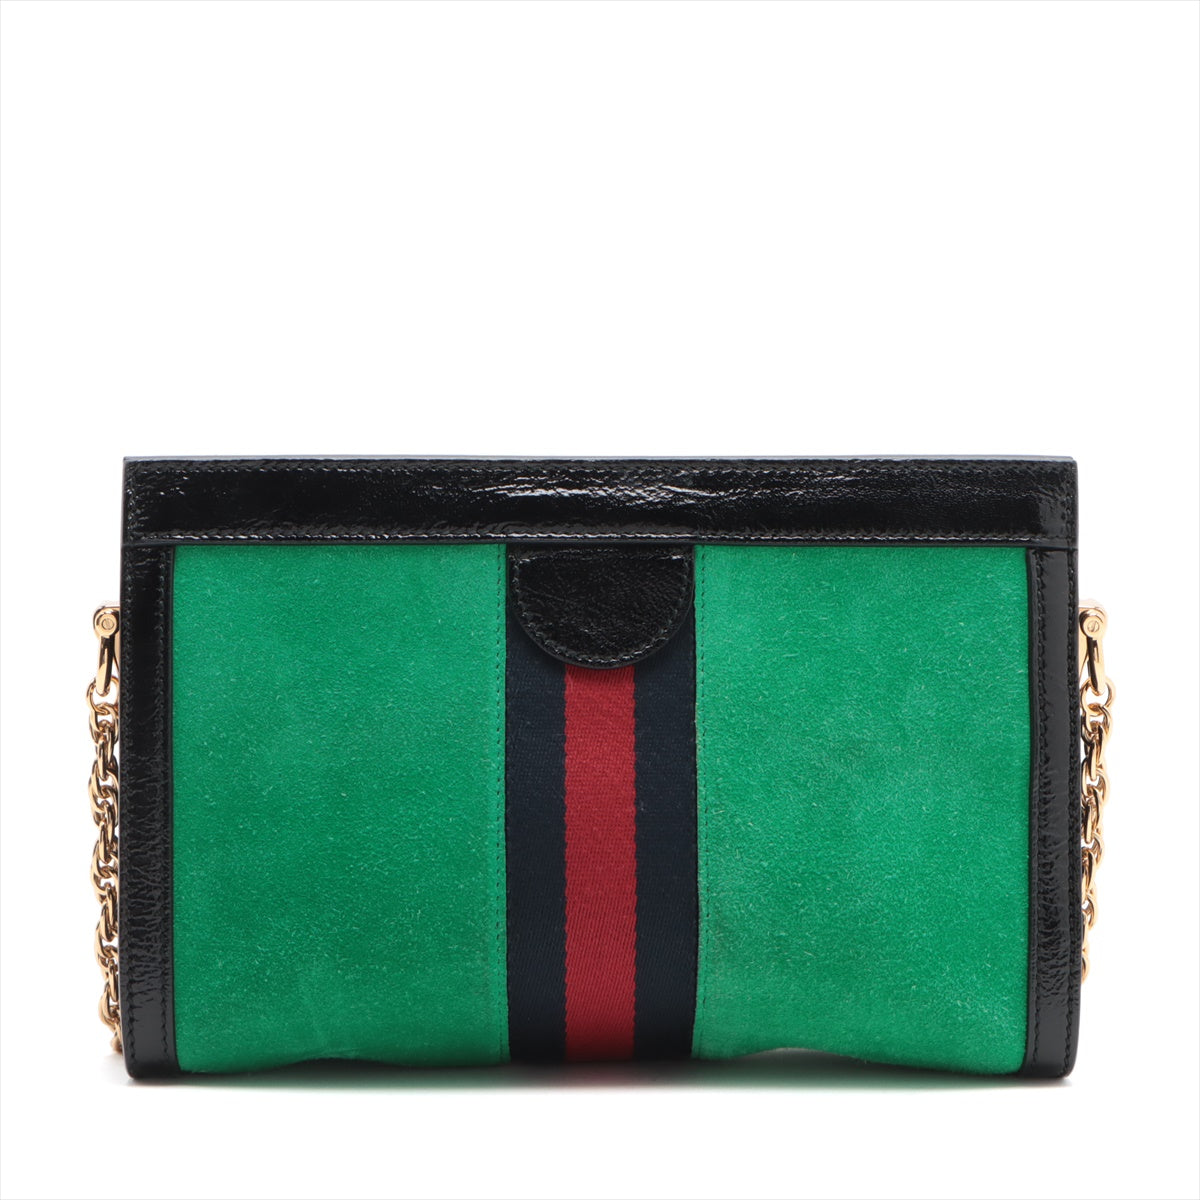 Gucci Ophidia Leather & suede Chain shoulder bag Green 503877